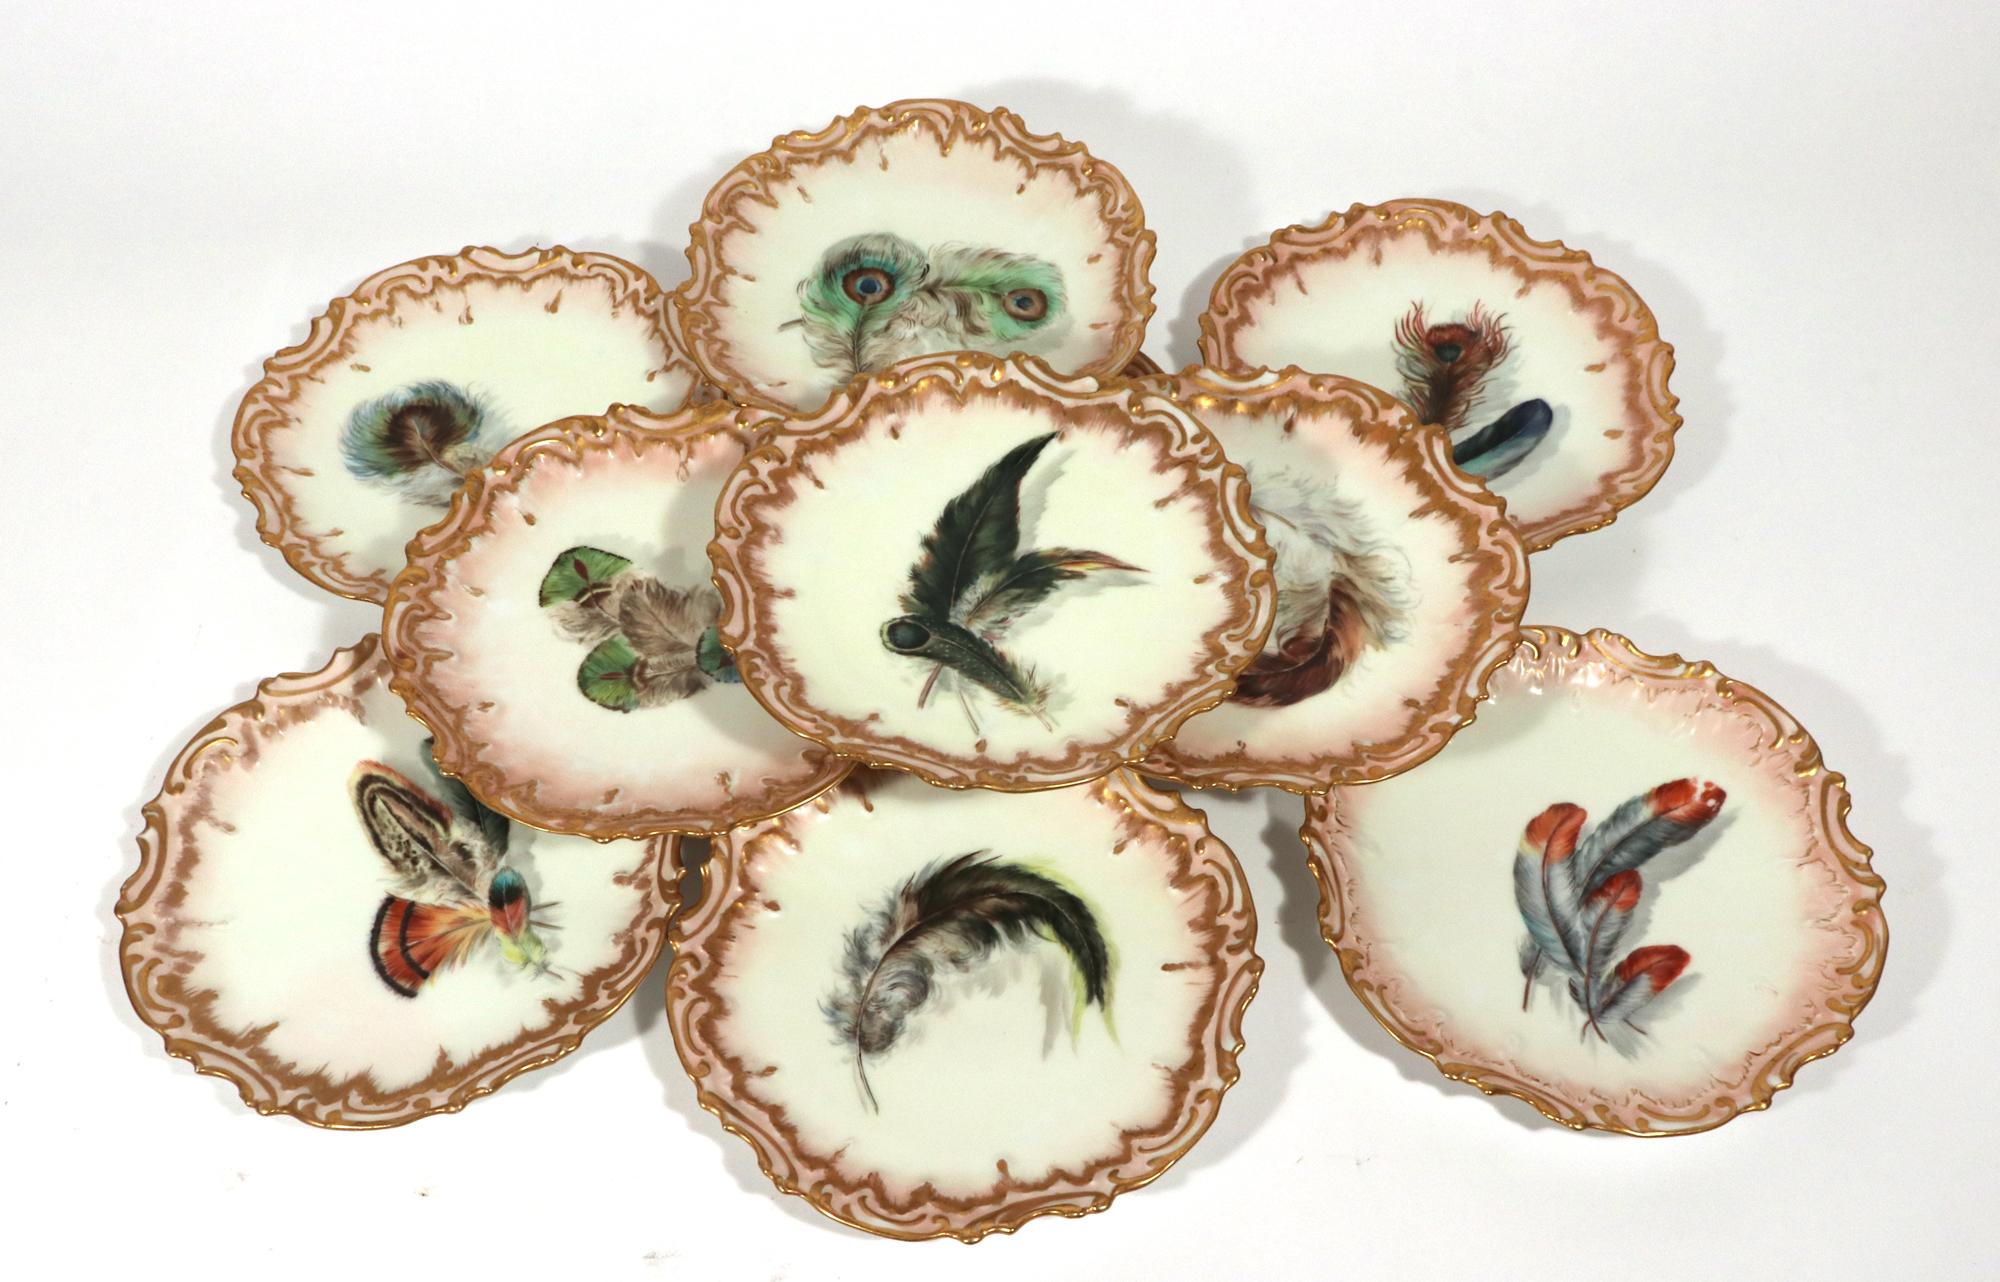 Victorian Limoges Porcelain Dessert Plates decorated with Feathers, Set of Ten